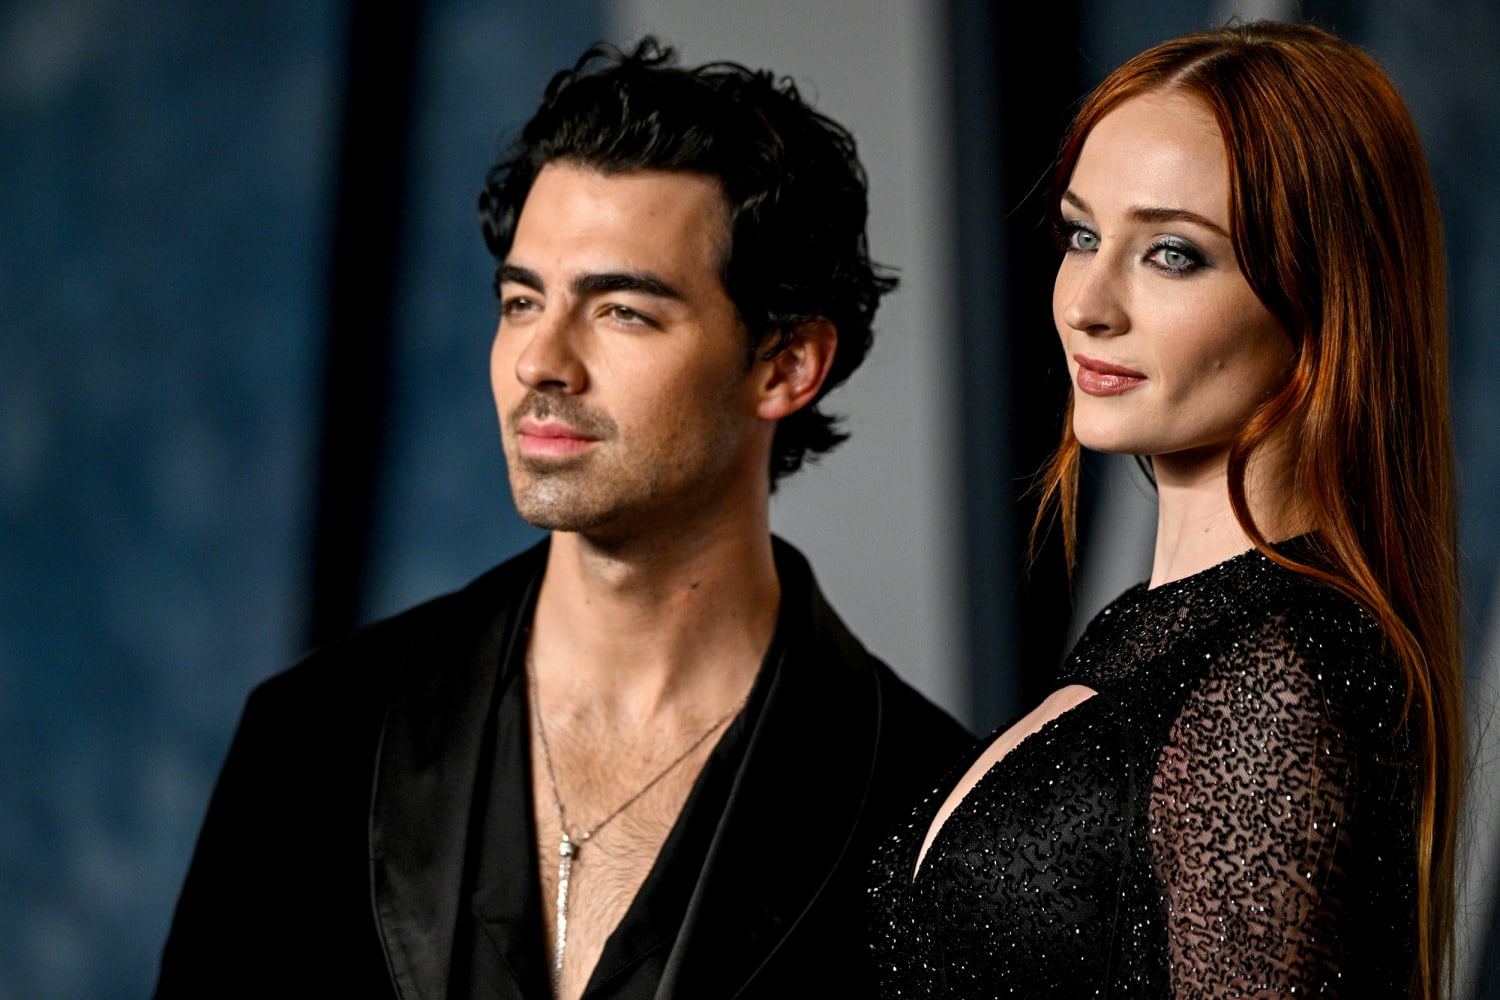 Joe Jonas and Sophie Turner say they have ‘mutually decided to amicably end’ their marriage